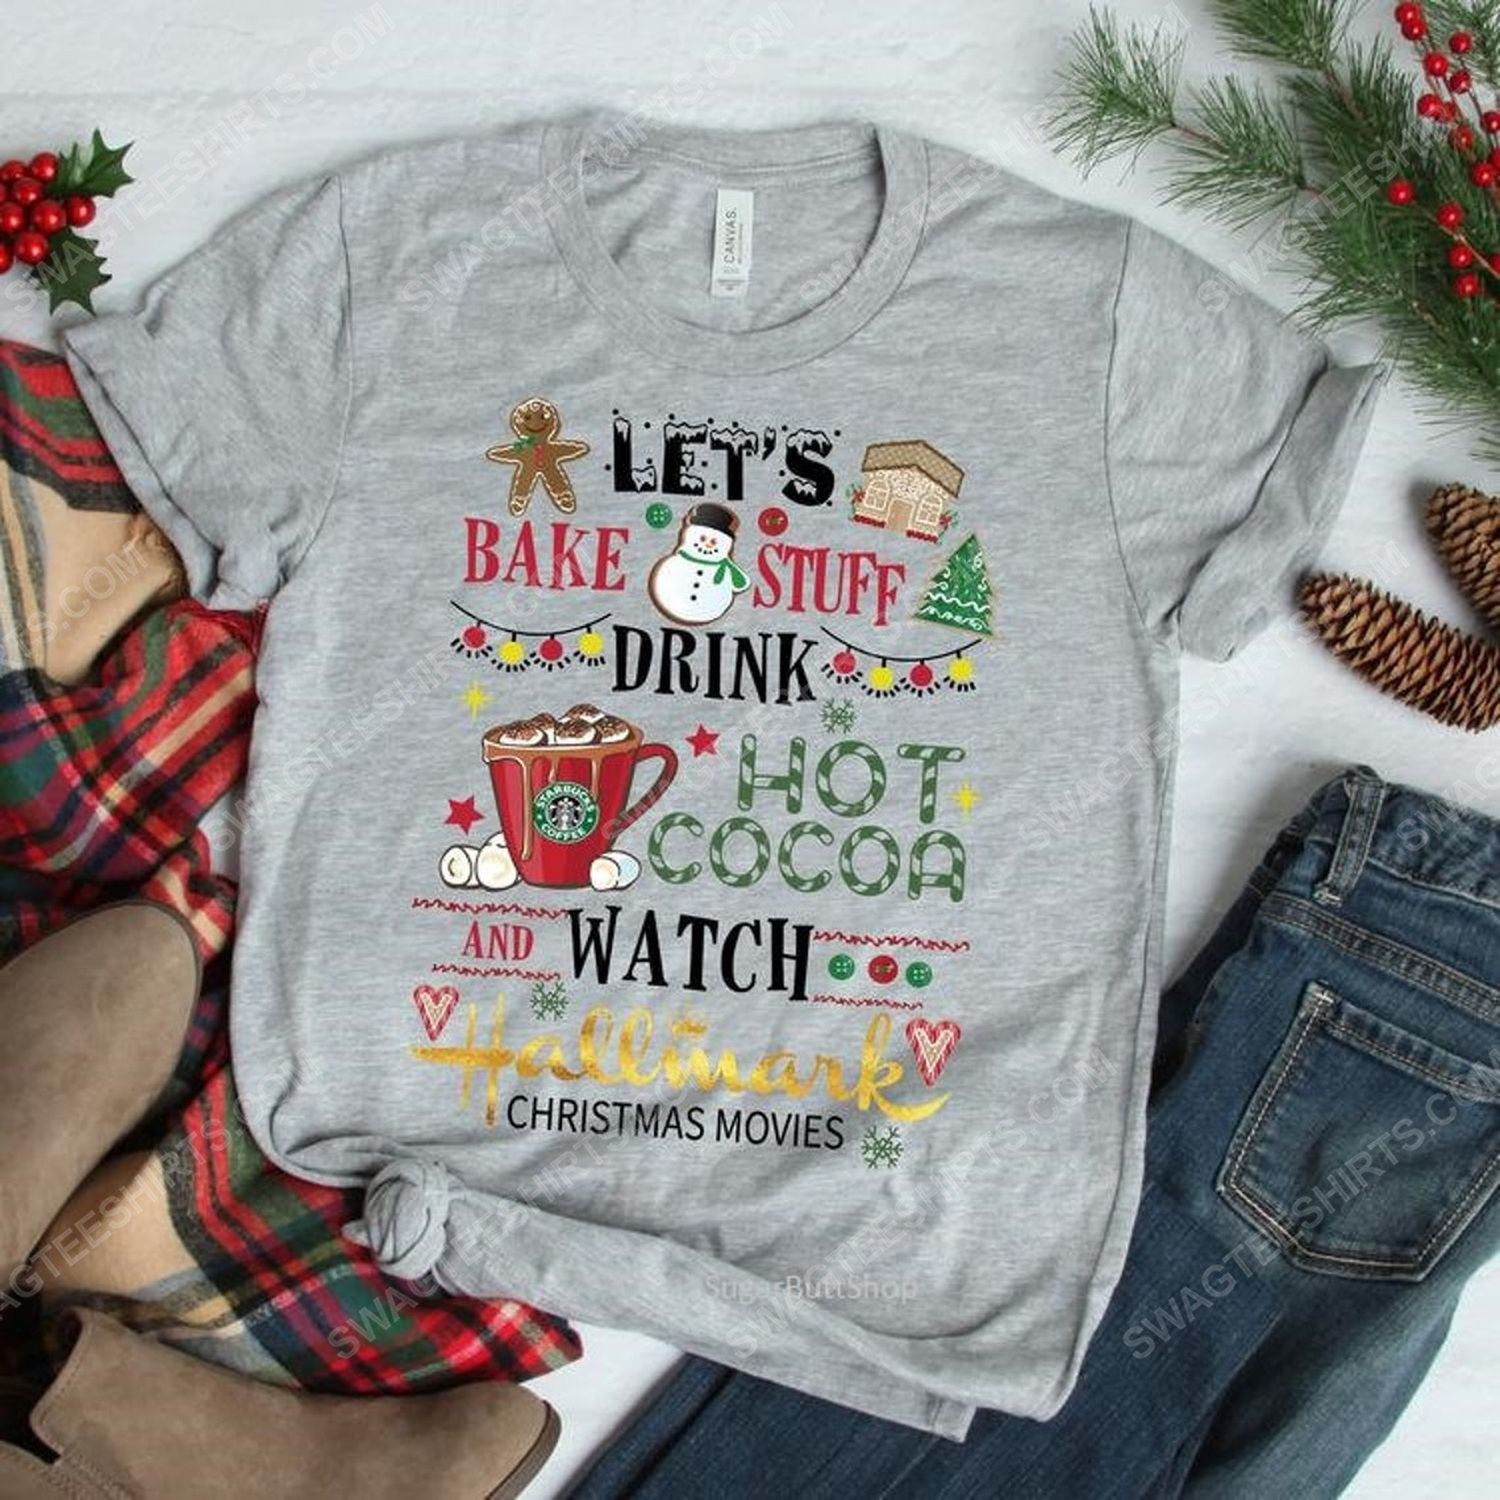 It's a hot cocoa fire place flannelpjs hallmark channel kind of day shirt 2